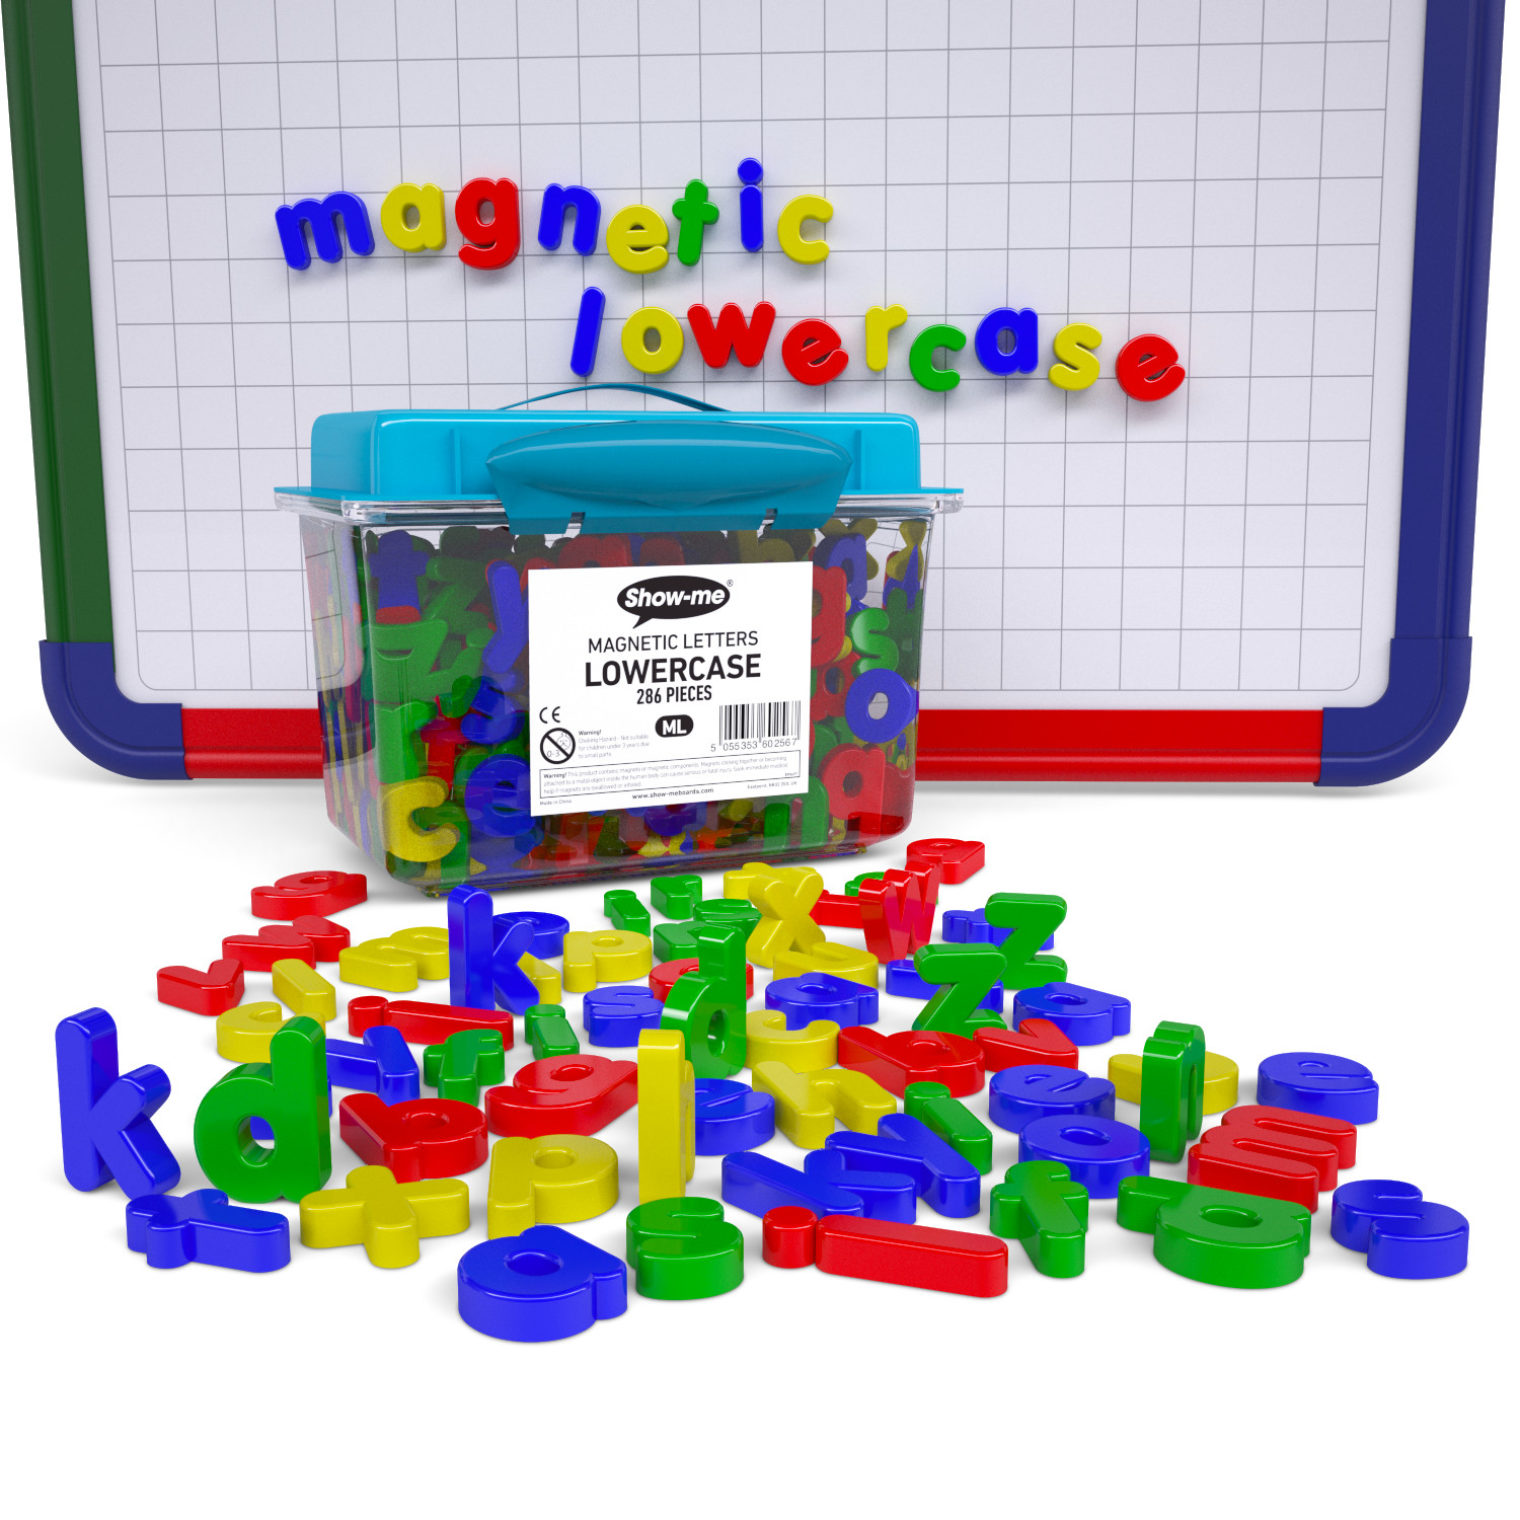 Show-me Magnetic lowercase letters board